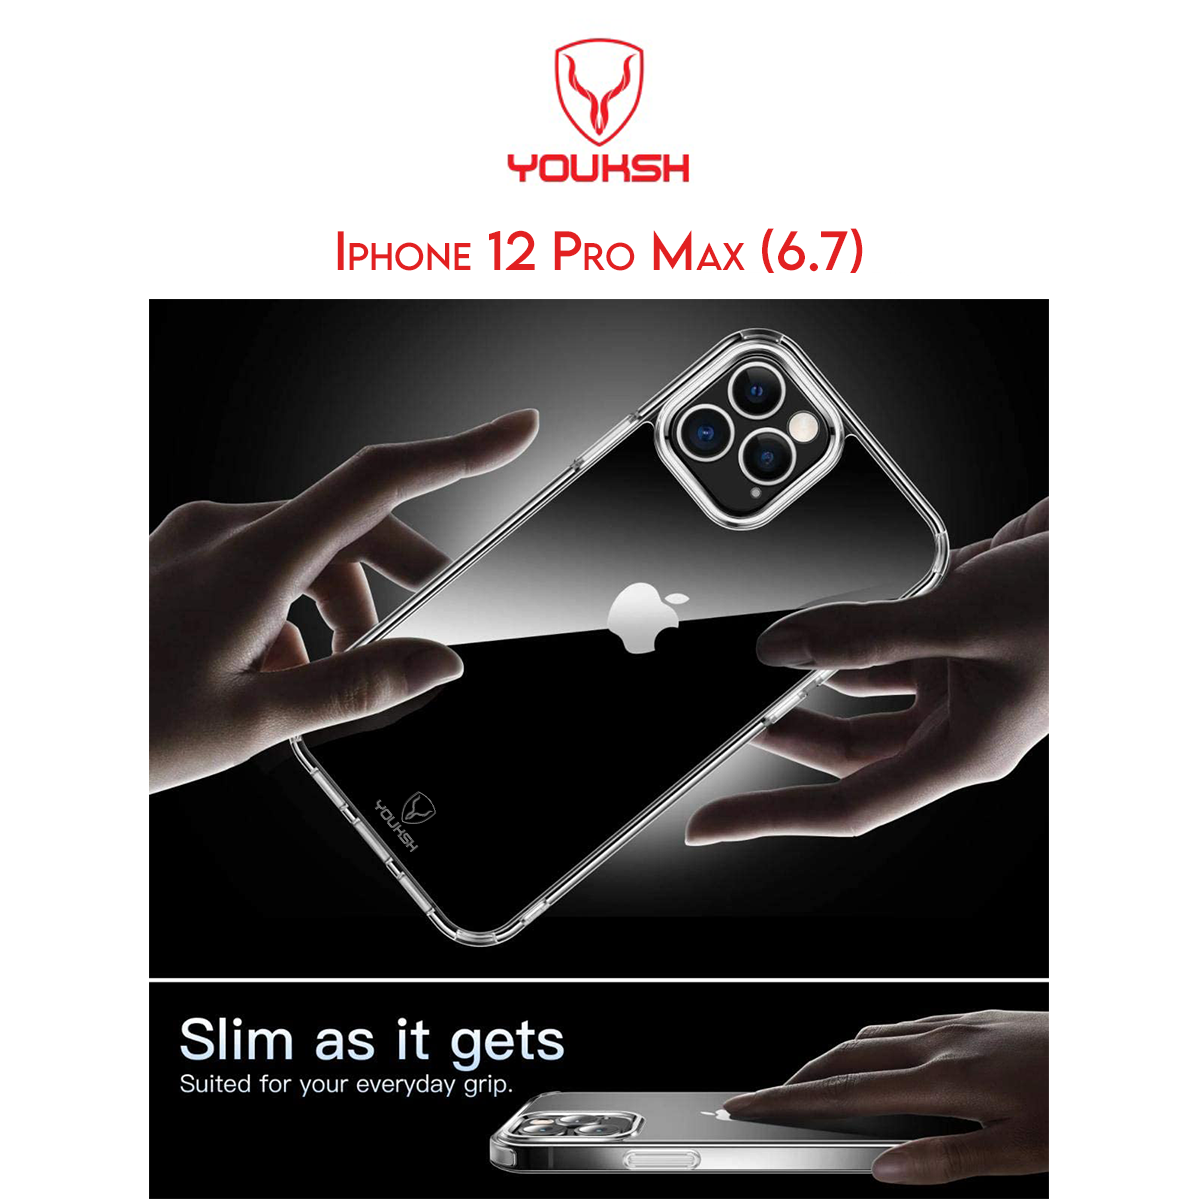 YOUKSH Apple IPhone 12 Pro Max (6.7) - Transparent Case - Transparent Camera Lens Protection Cover - Soft Shock Proof Jelly Back Transparent Cover.